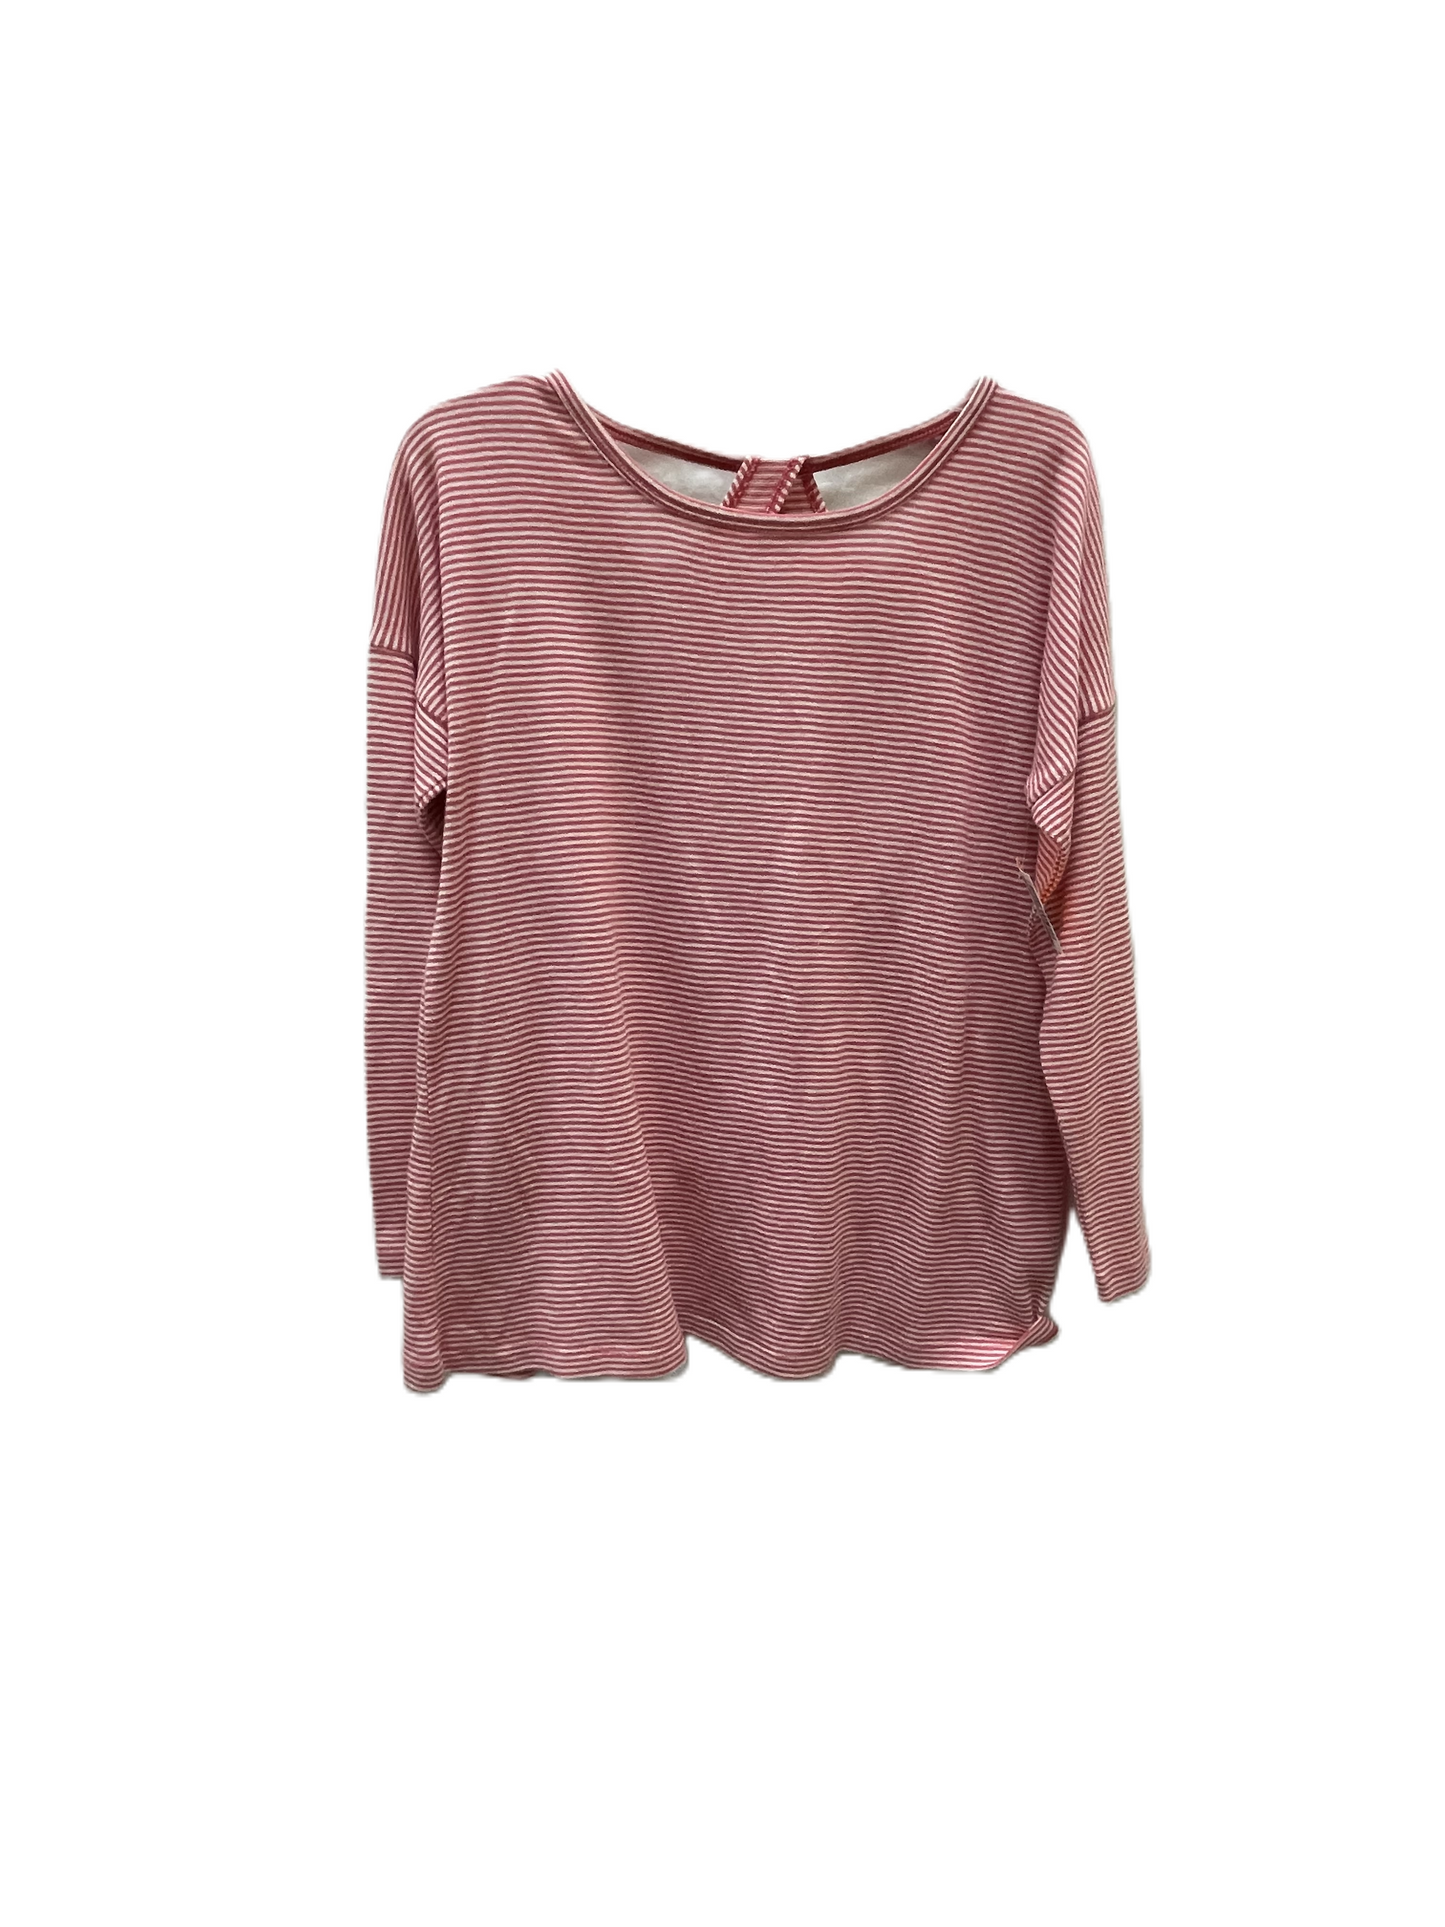 Top Long Sleeve By Soft Surroundings  Size: S